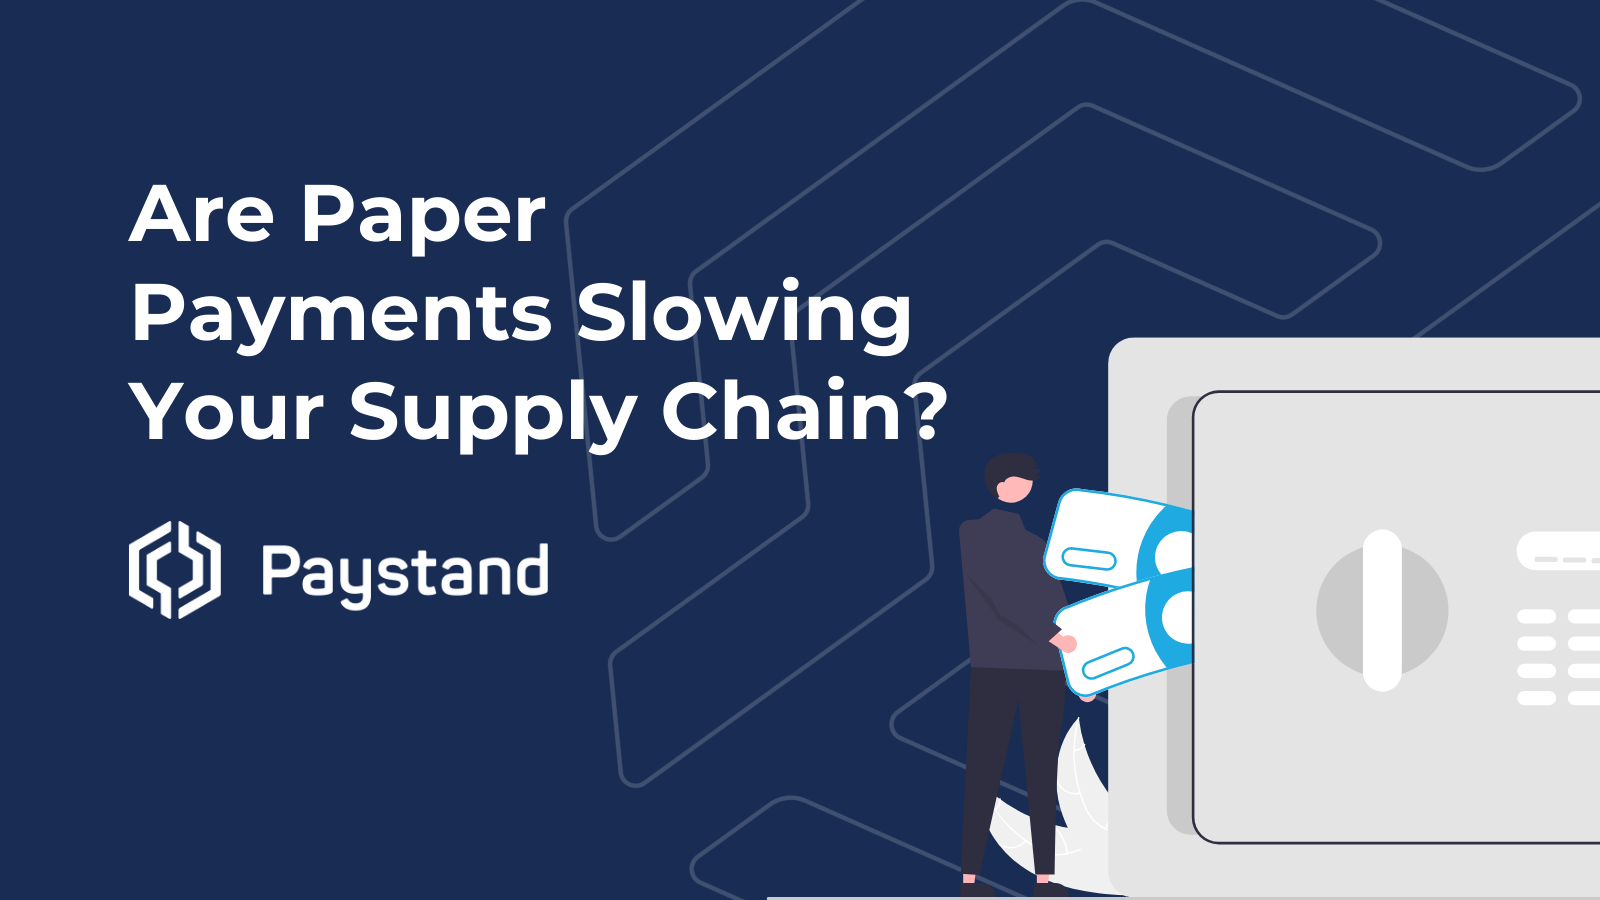 Are Paper Payments Slowing Your Supply Chain?